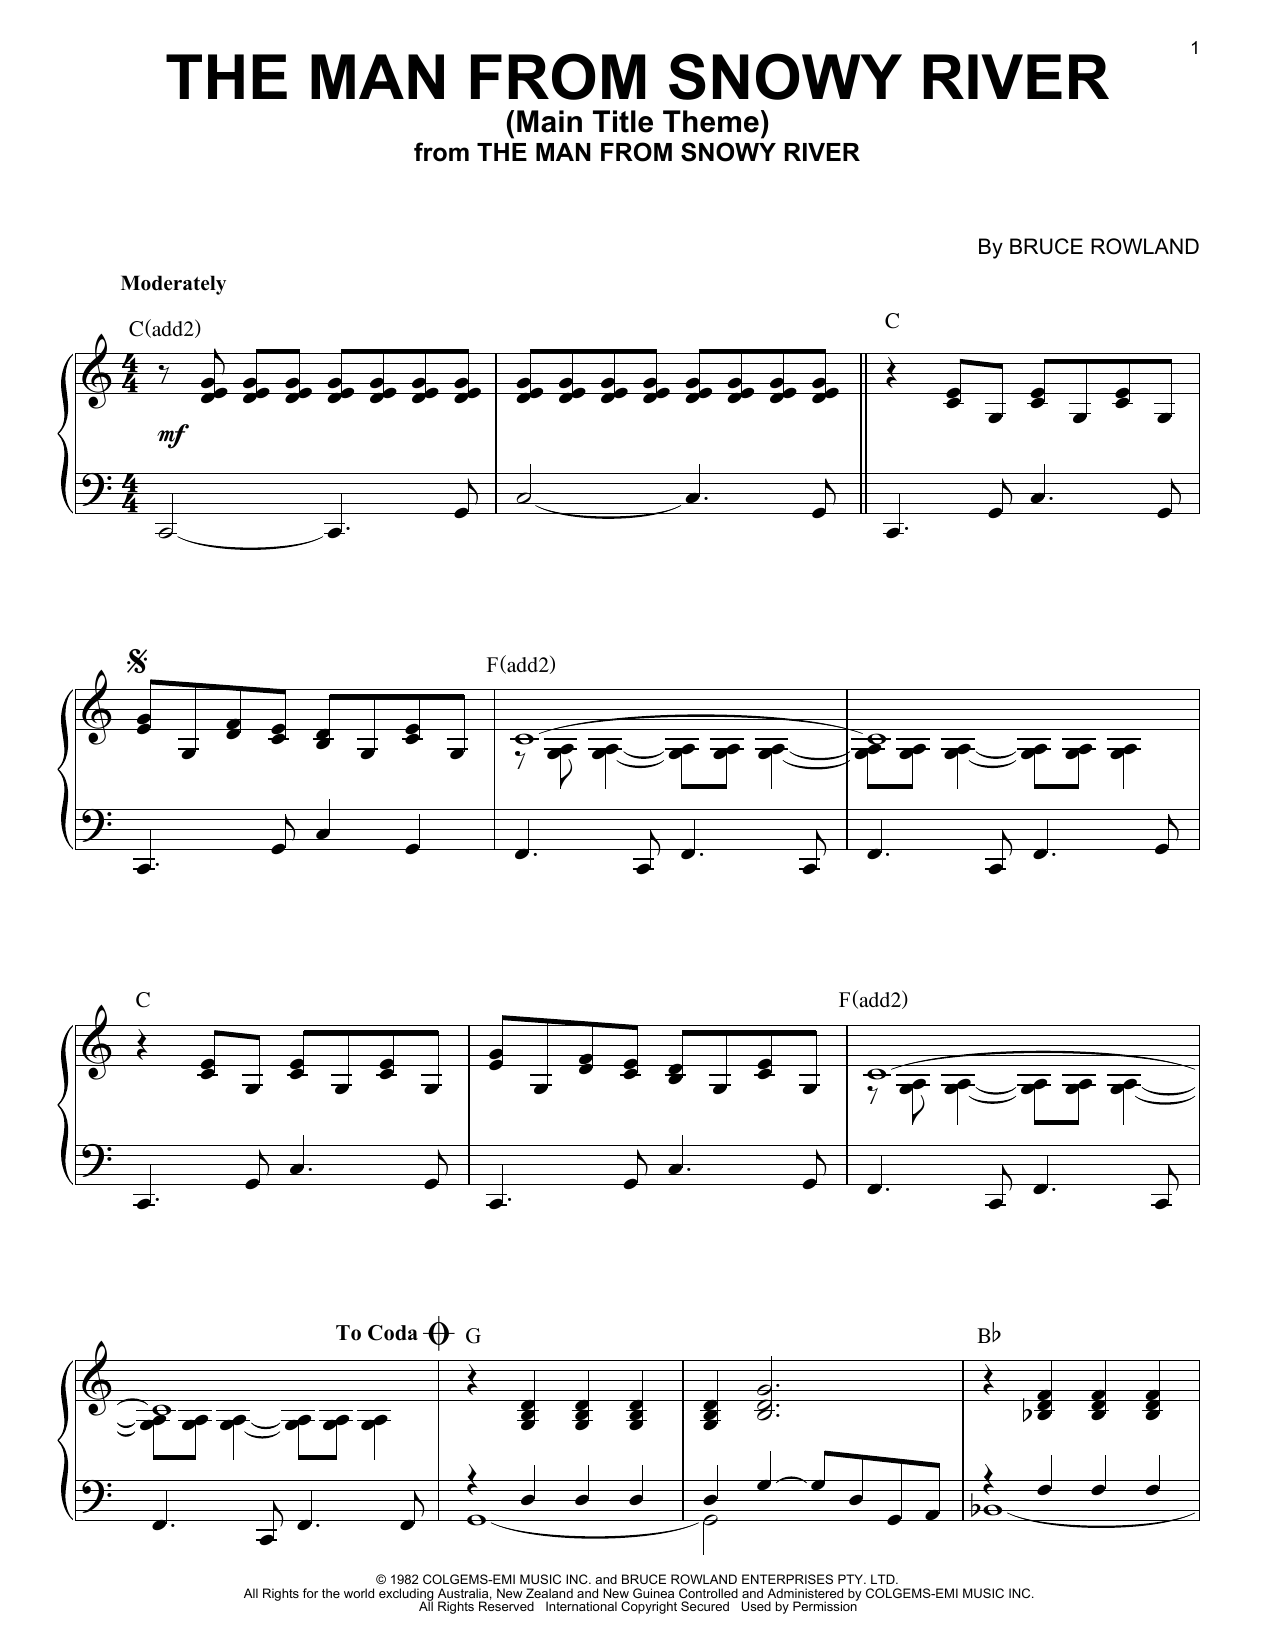 Bruce Rowland The Man From Snowy River Main Title Theme Sheet Music Pdf Notes Chords Film Tv Score Piano Solo Download Printable Sku 85258